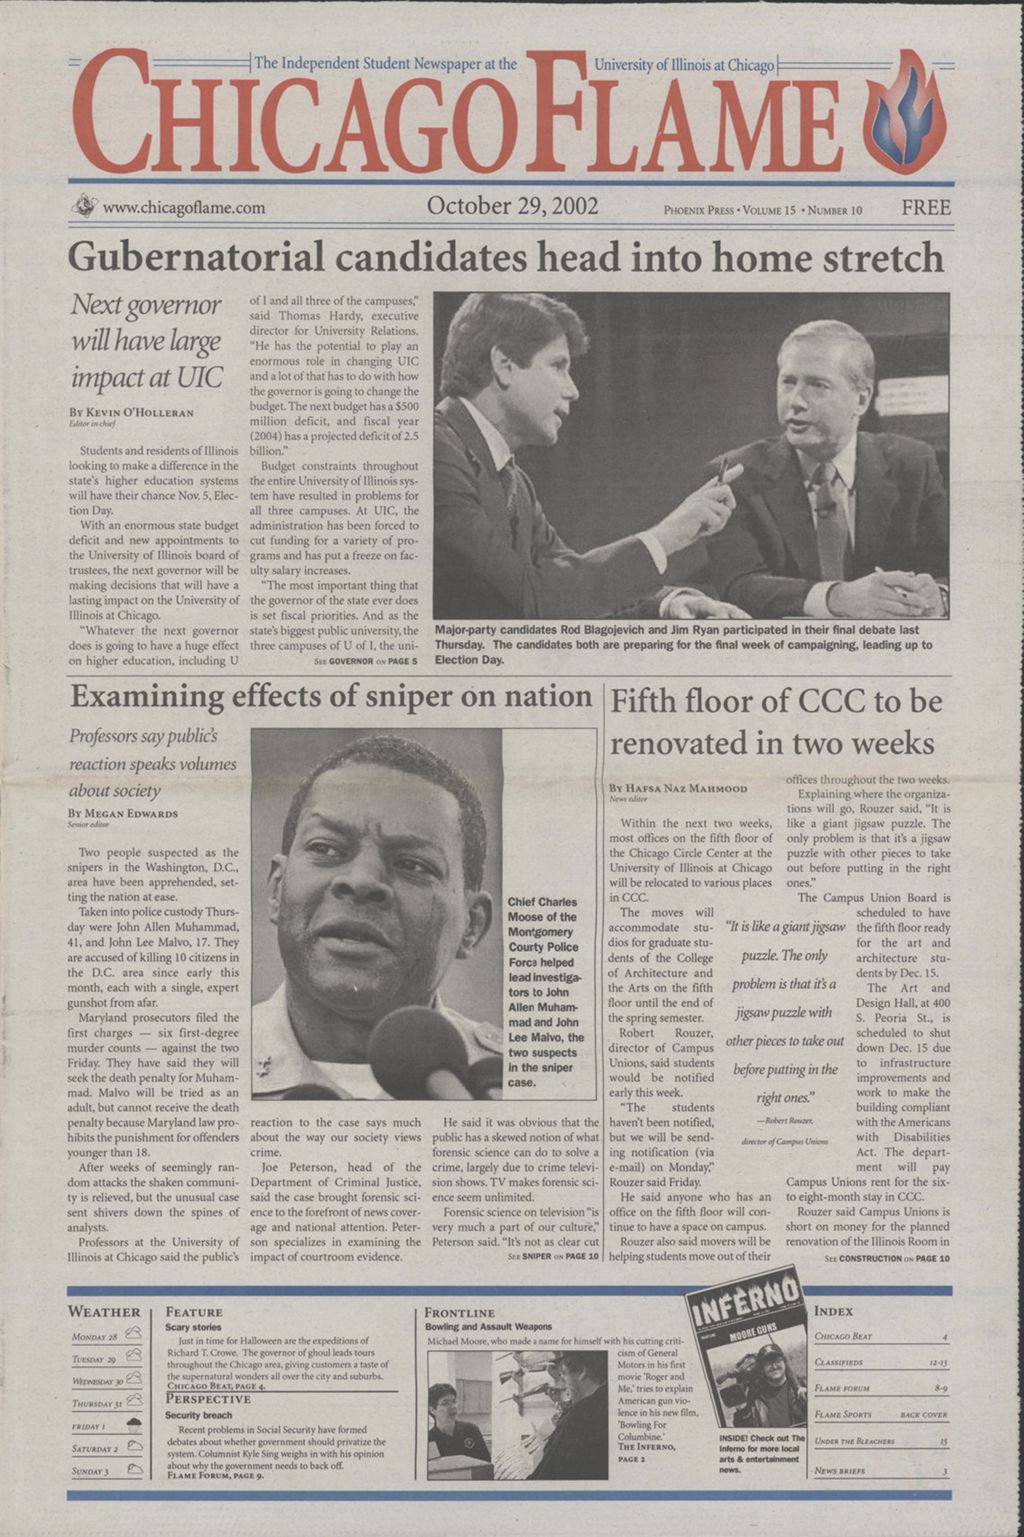 Chicago Flame (October 29, 2002)